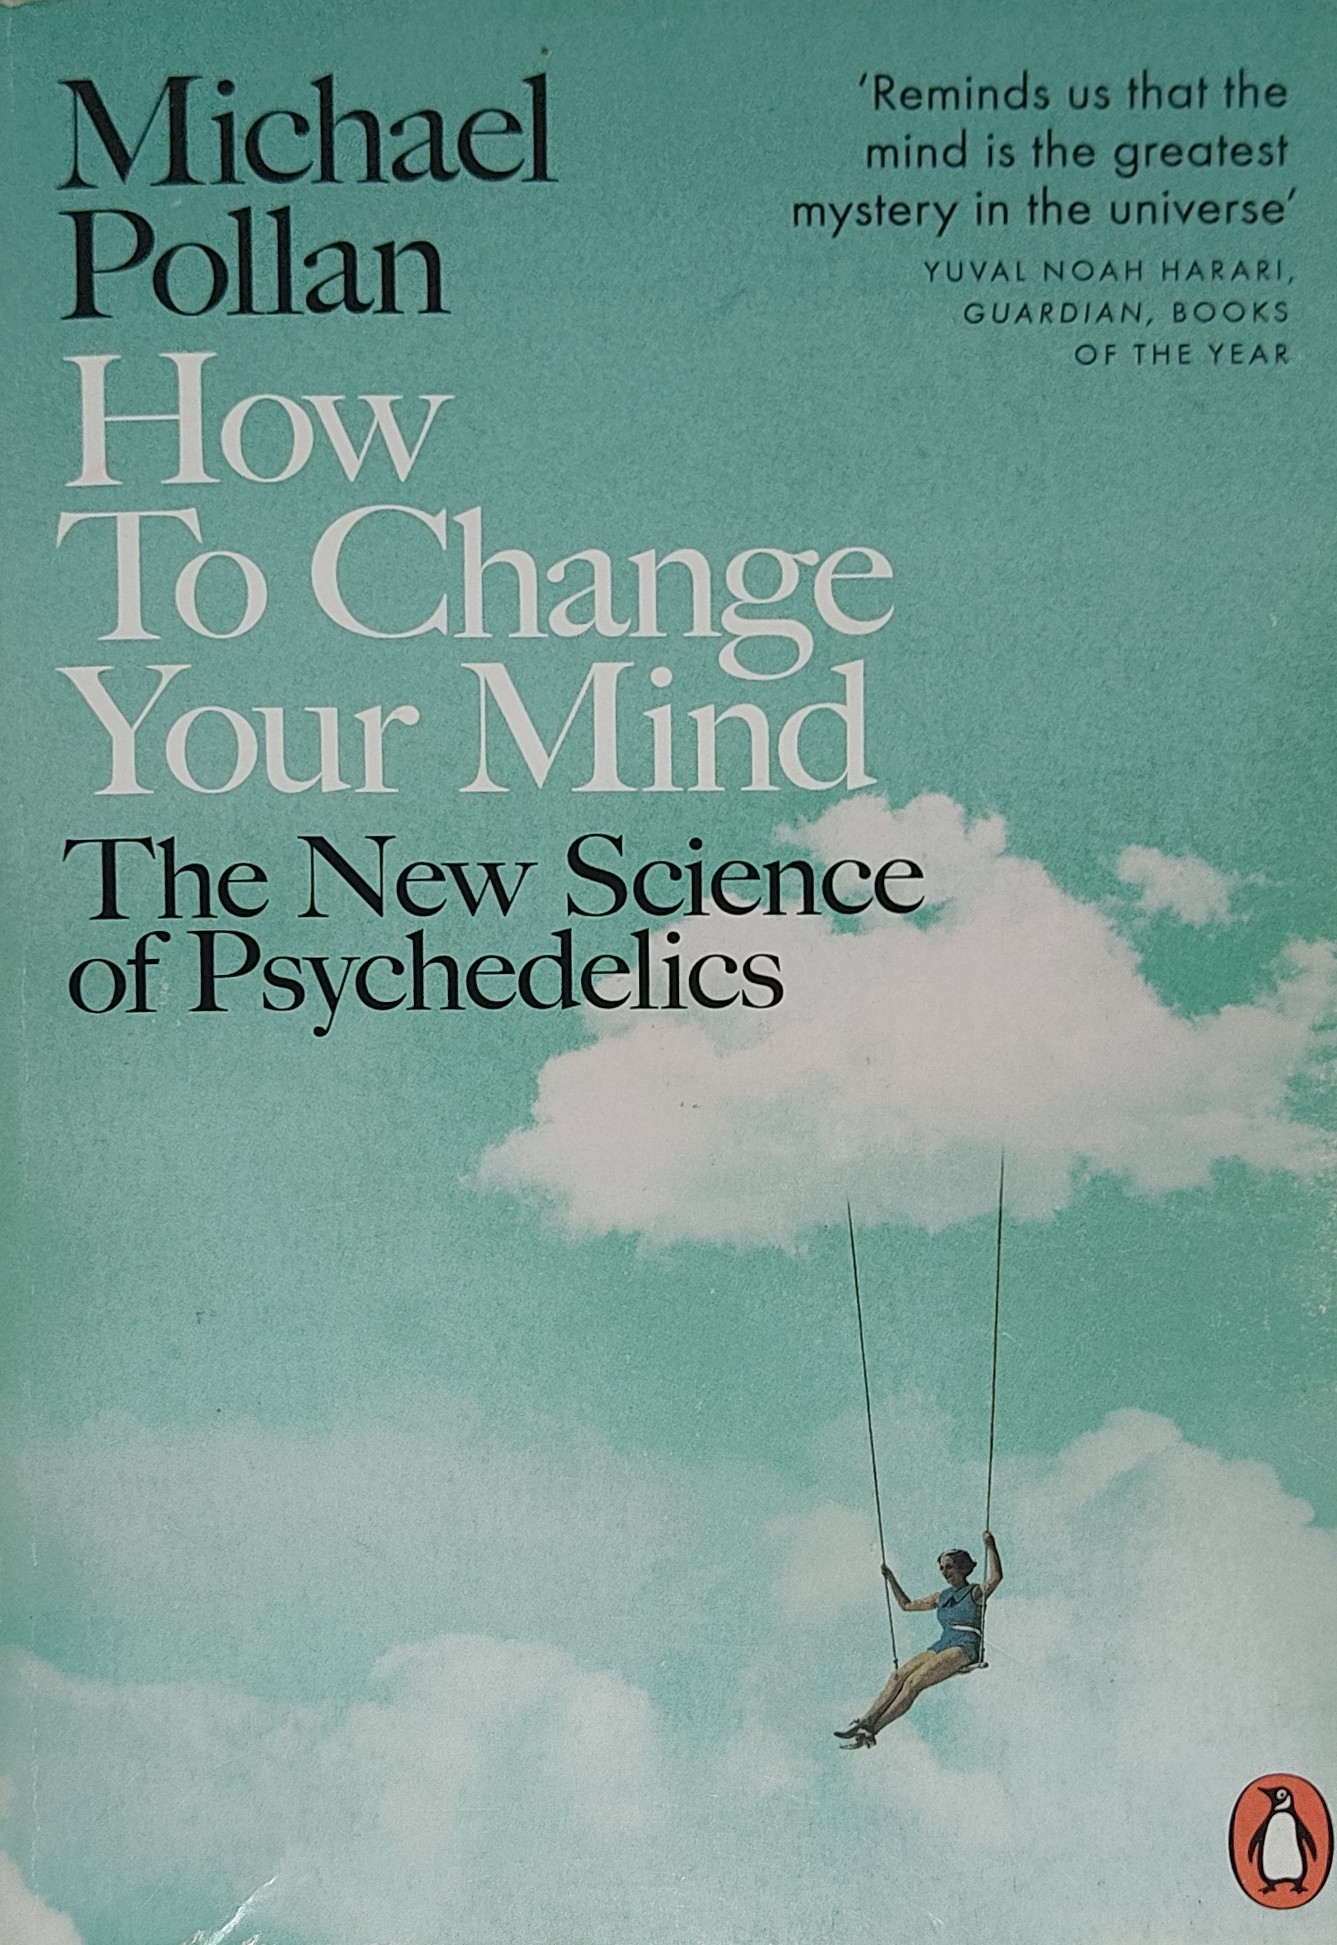 How to Change Your Mind (2019, Penguin Books, Limited)